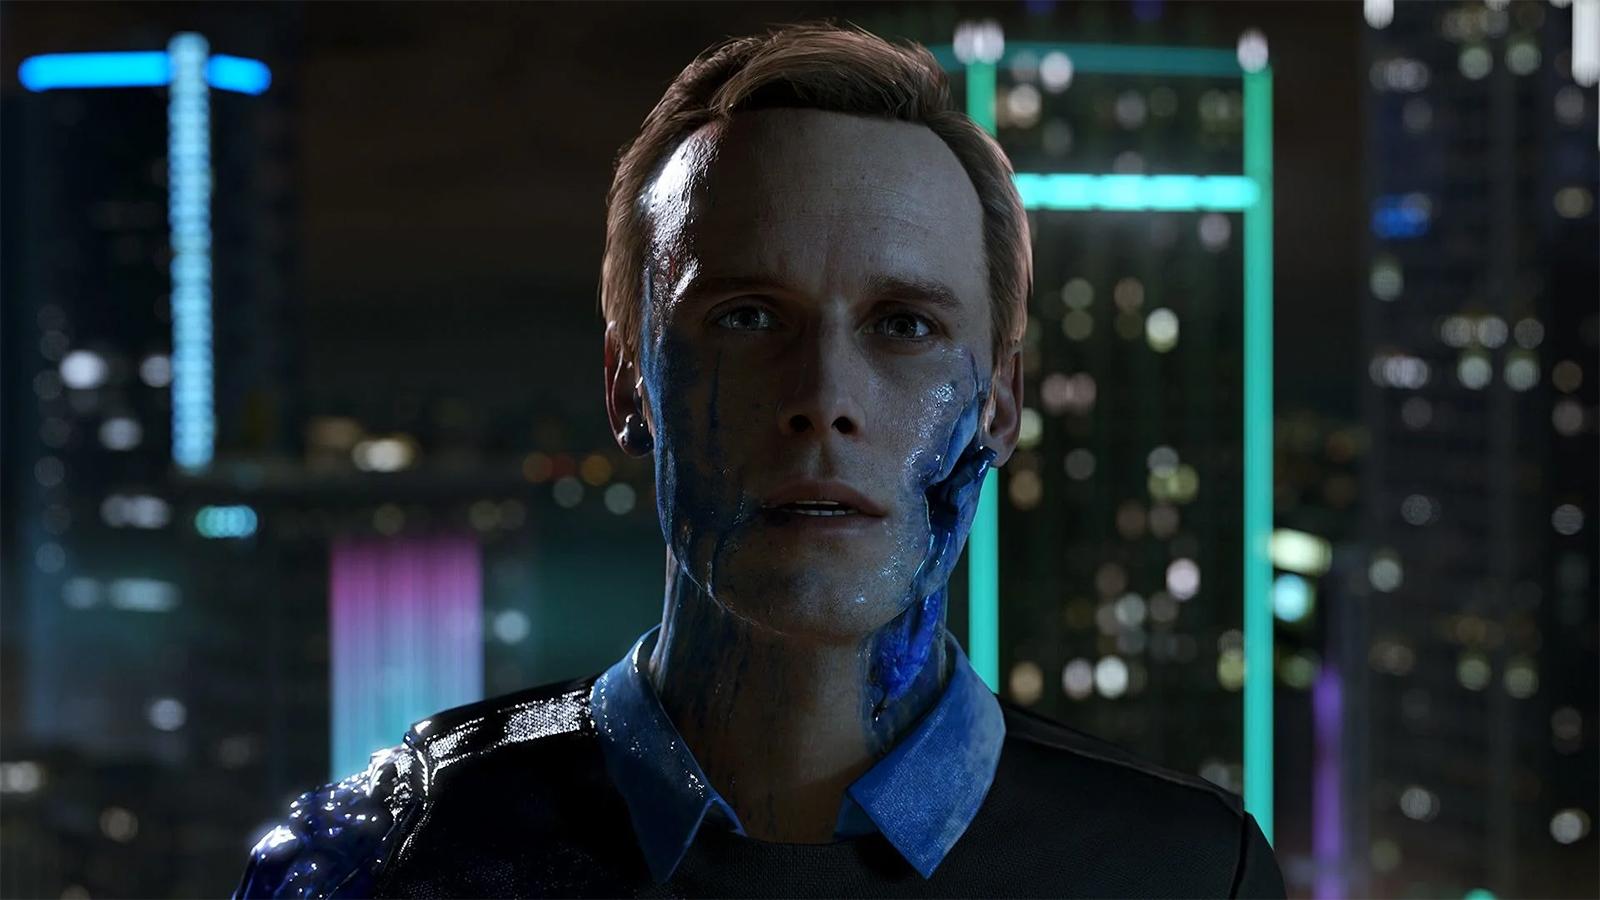 The character Daniel in Detroit Become Human's cast